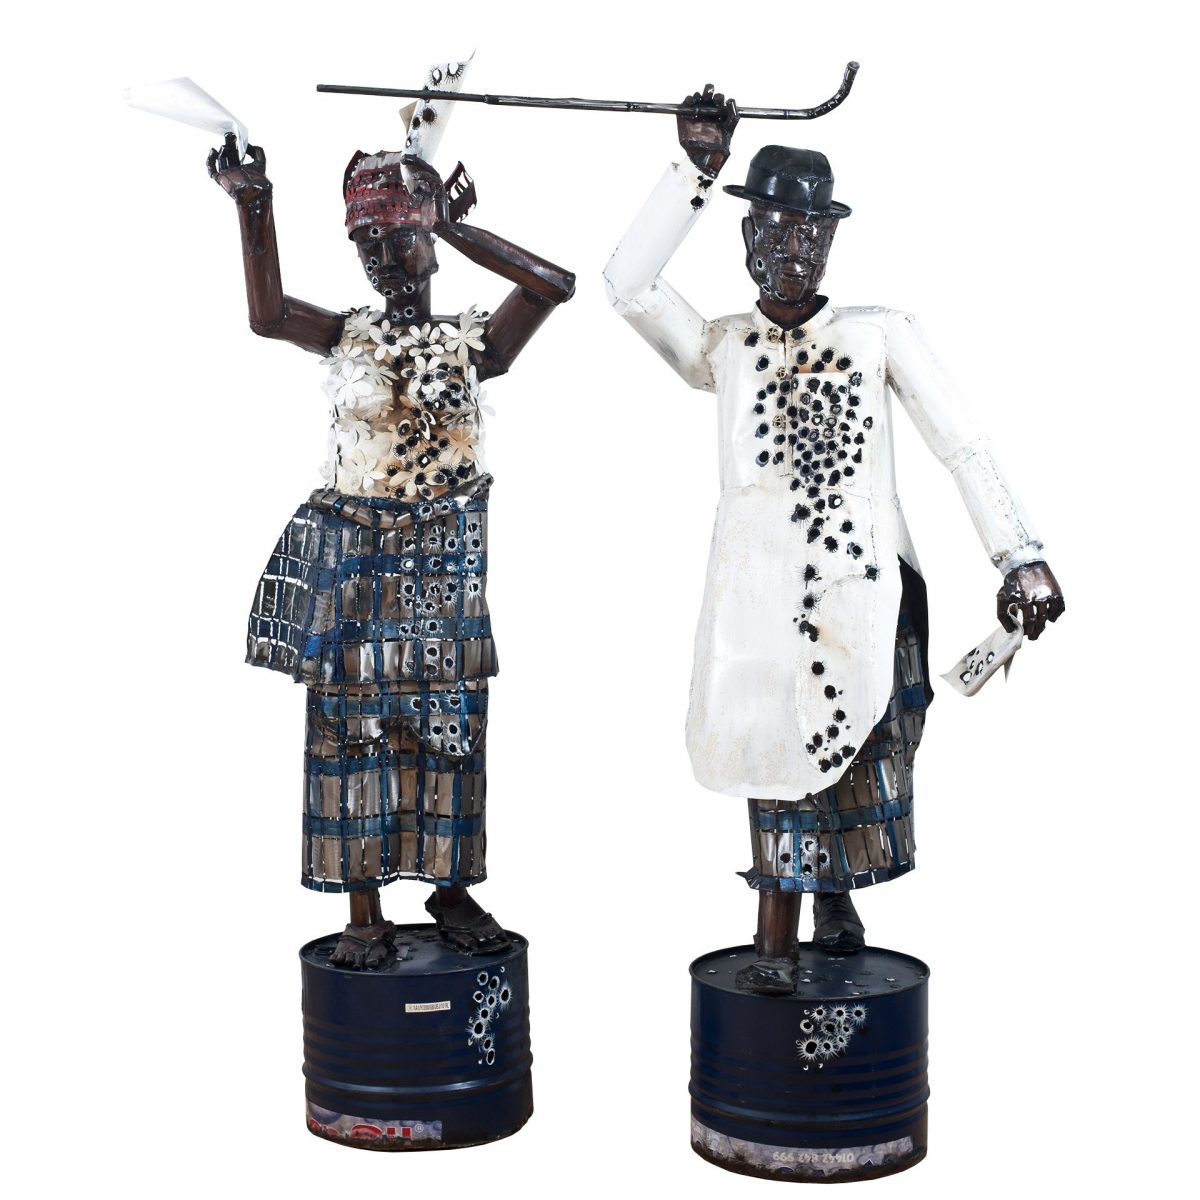 Collectors’ demands increased consistently for works by African artists. 